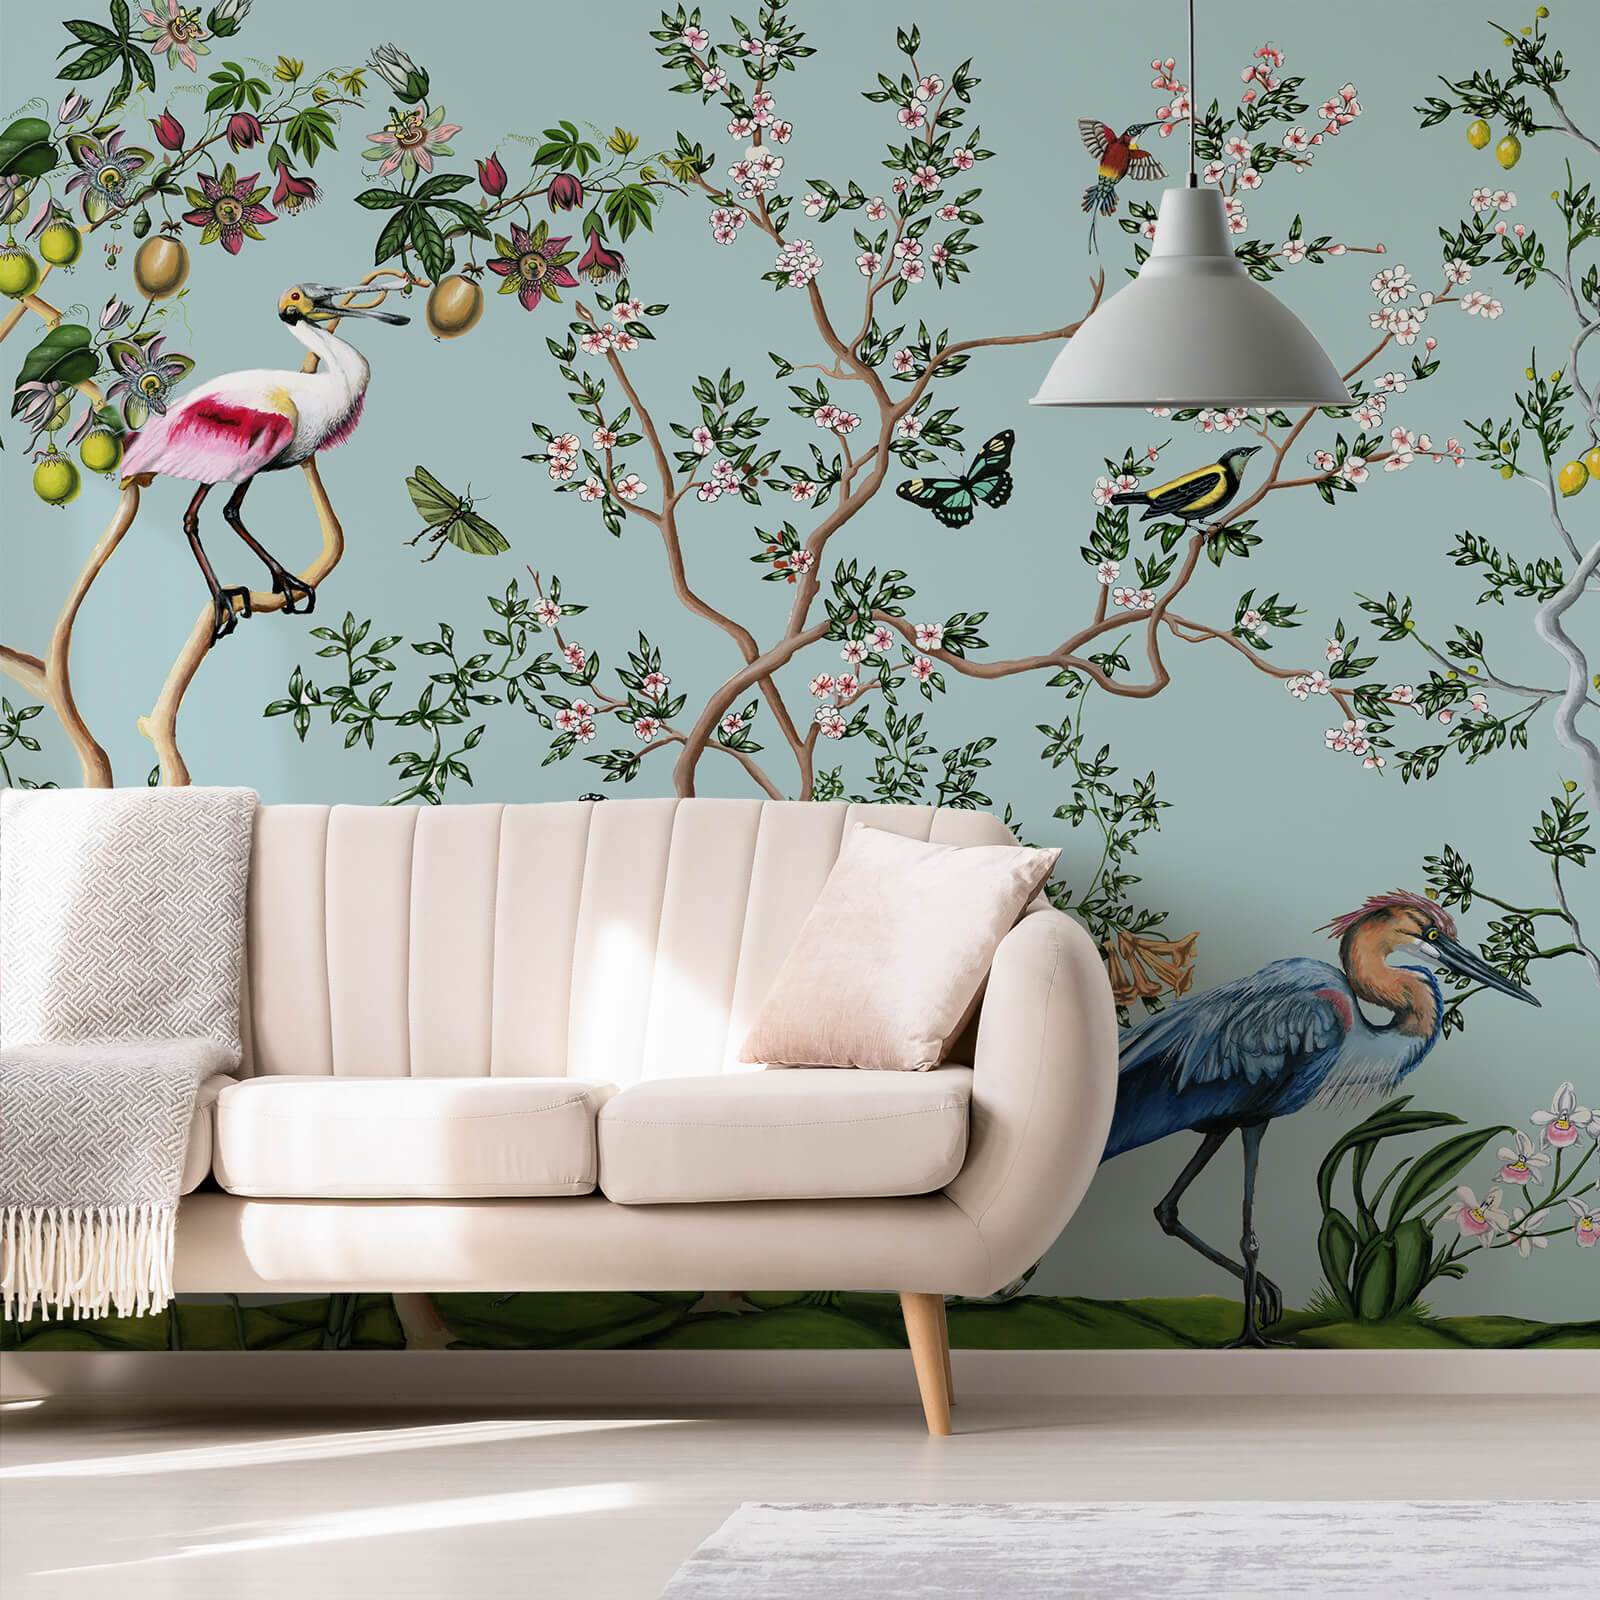 Bird Wallpaper Self Adhesive Peel and Stick Colorful Europian Birds Wall  Mural Removable Leaf Pattern Wallpaper Living Room Bedroom Entryway Wall  Décor Home Décor etnacompe